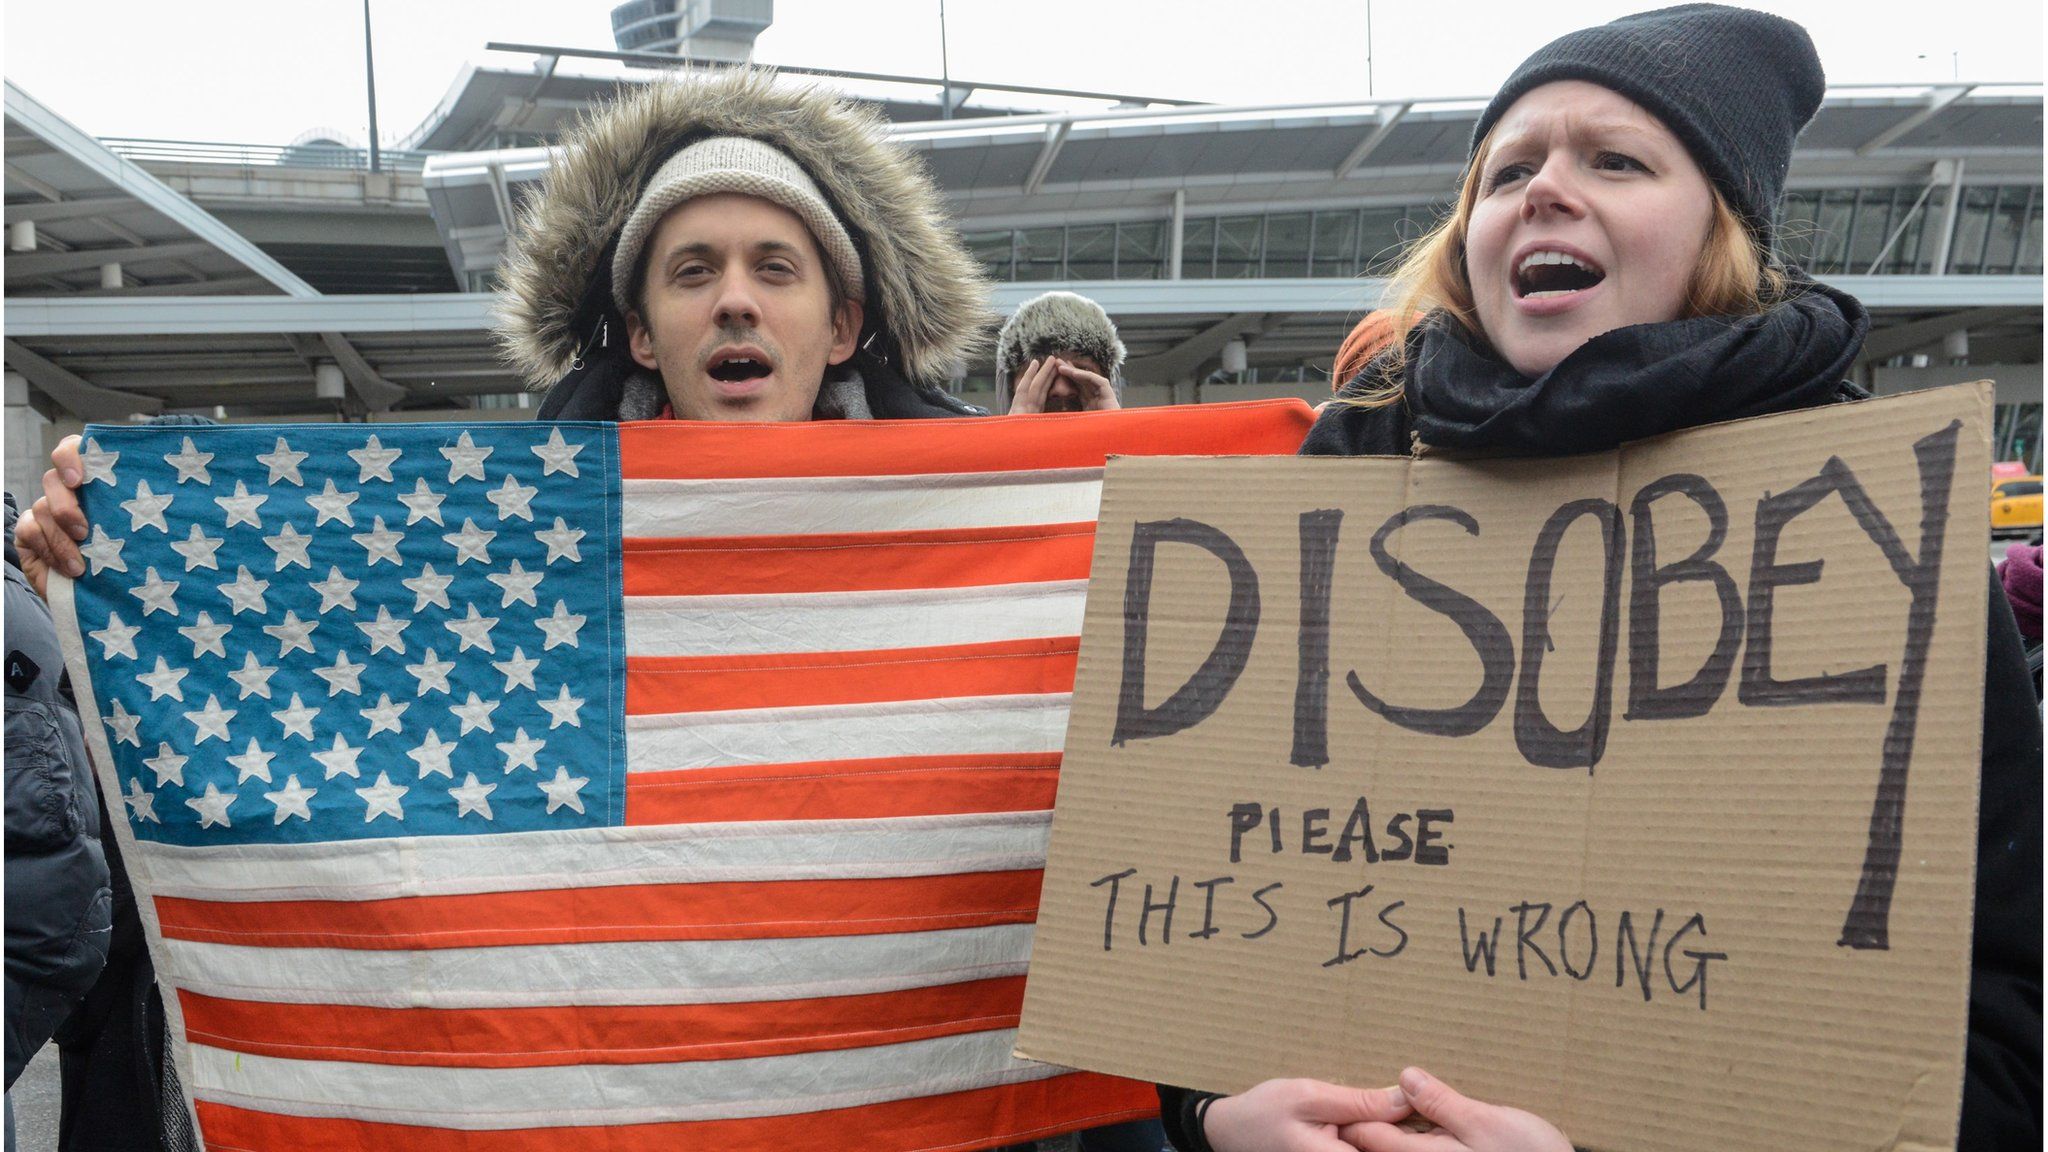 Protesters rally during a protest against the Muslim immigration ban at John F. Kennedy International Airport on January 28, 2017 in New York City